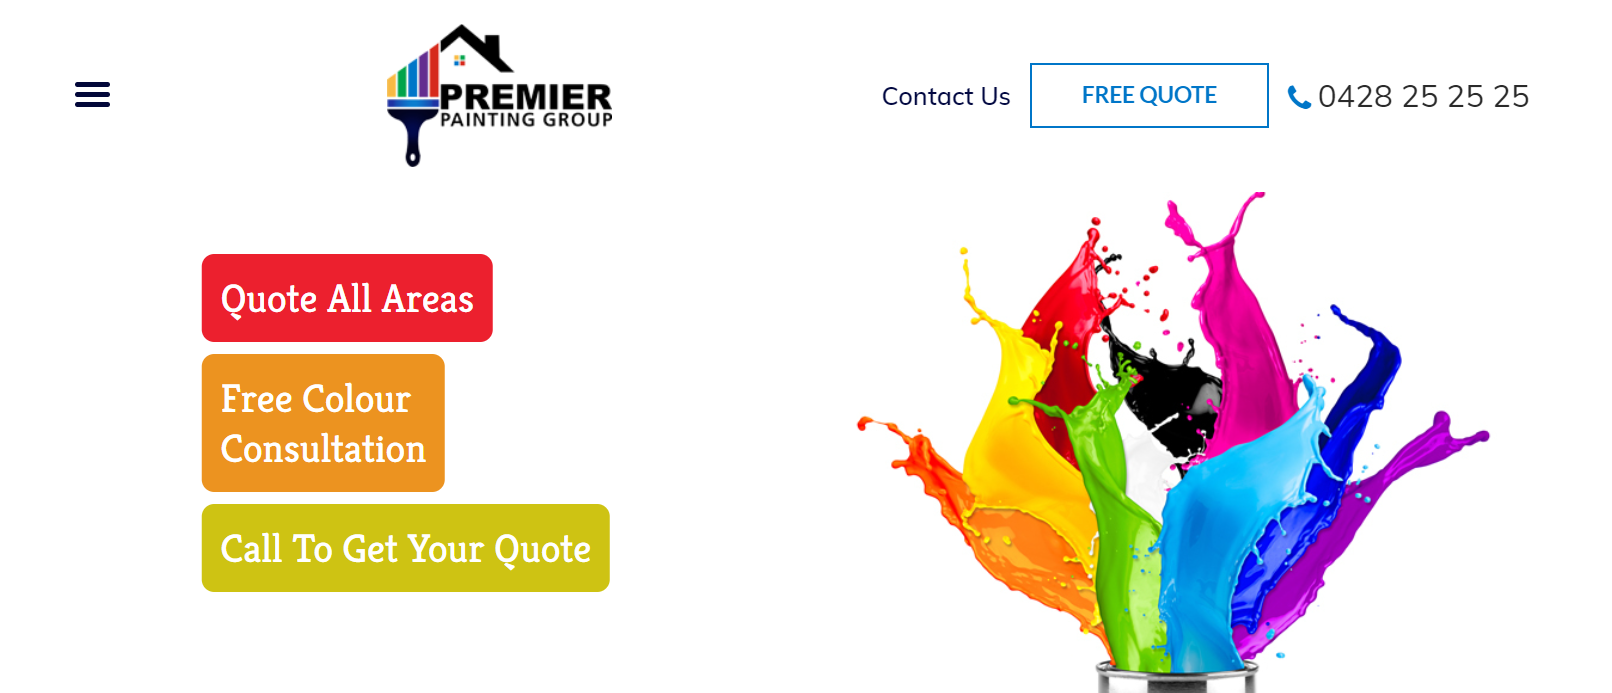 Landing page of a company website called Premier Painting Group